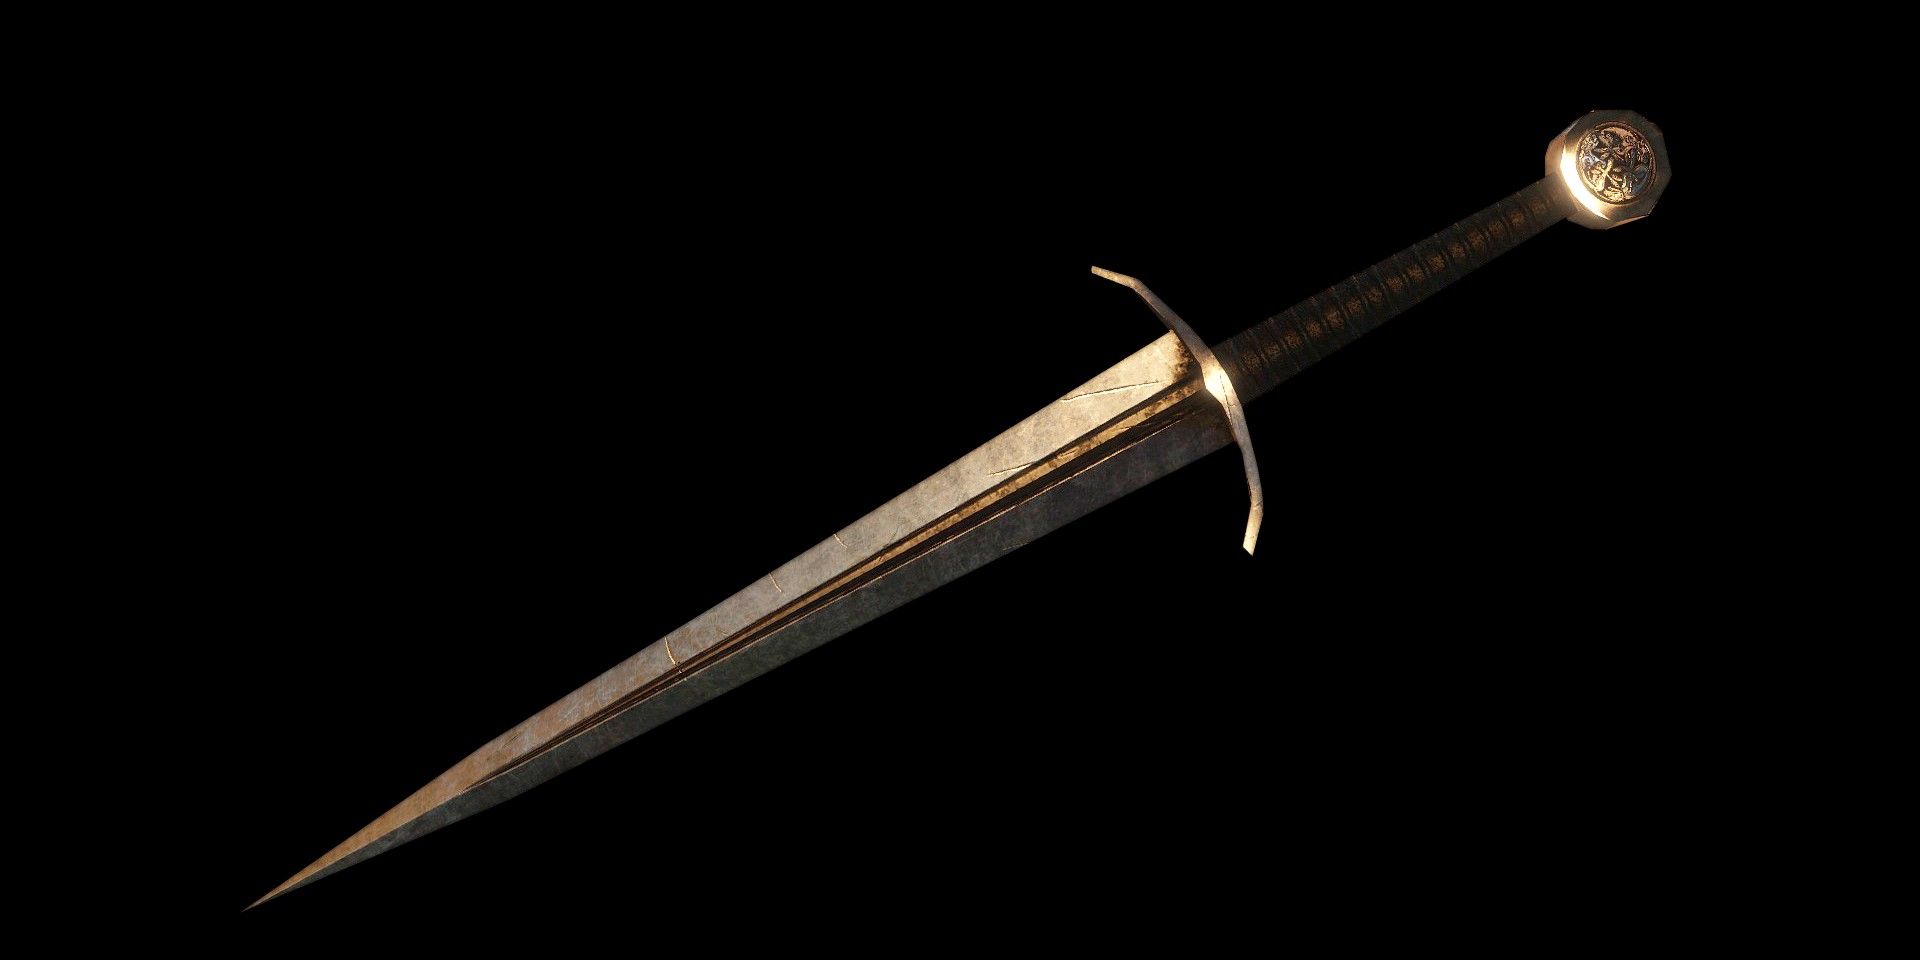 clean shot of a one-handed straight sword on a black background.